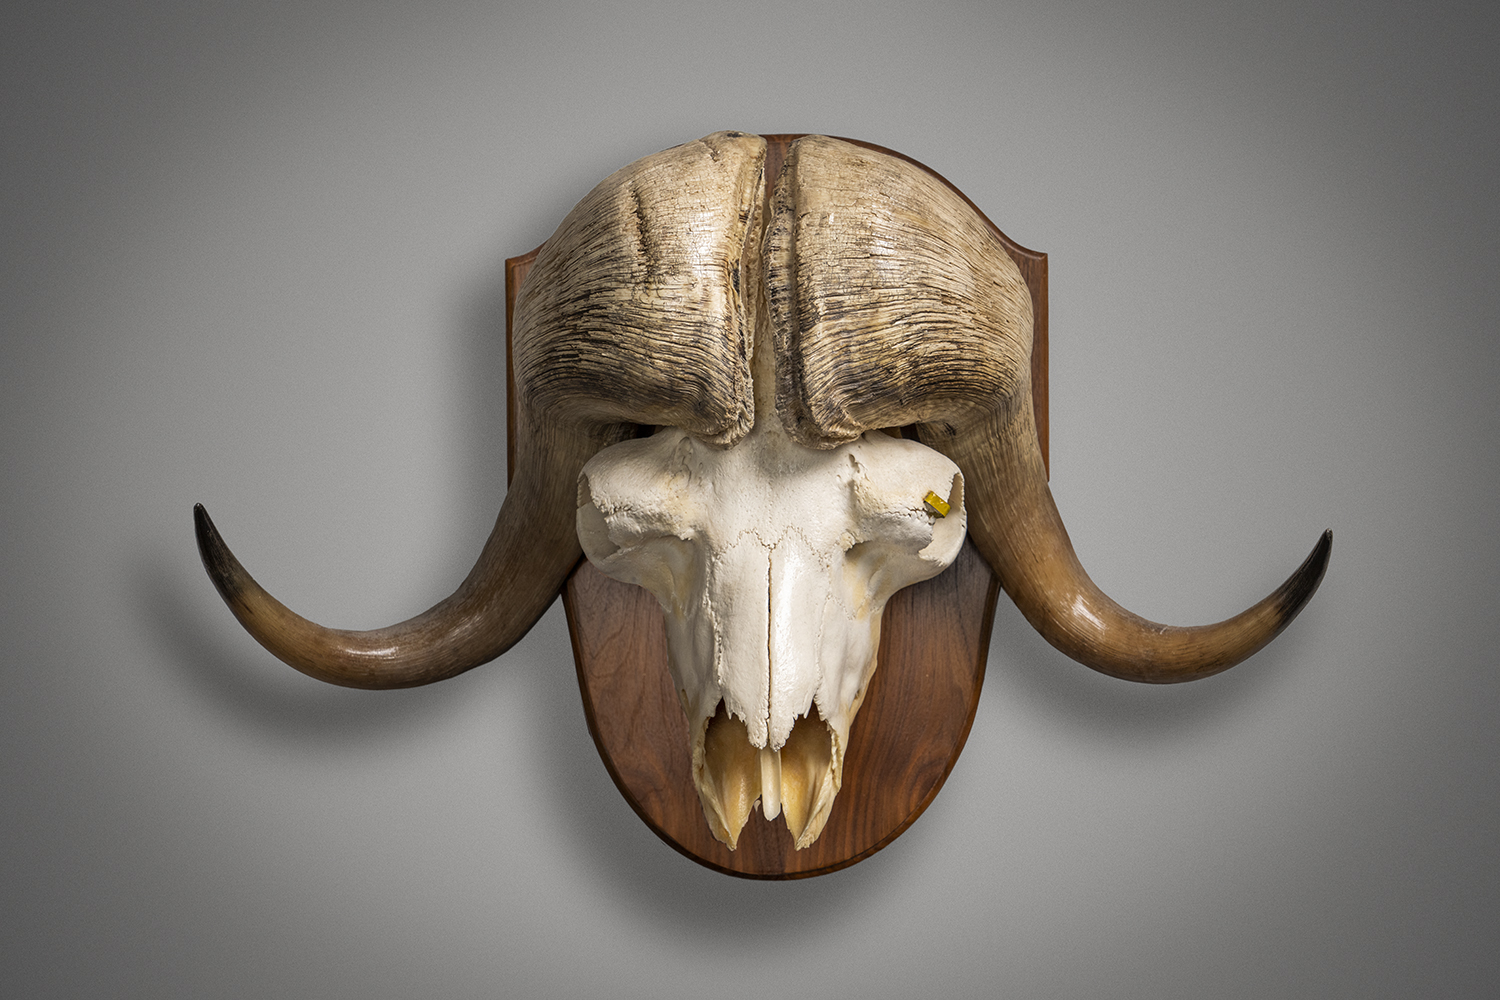 A musk ox mount from the National Collection of Heads and Horns